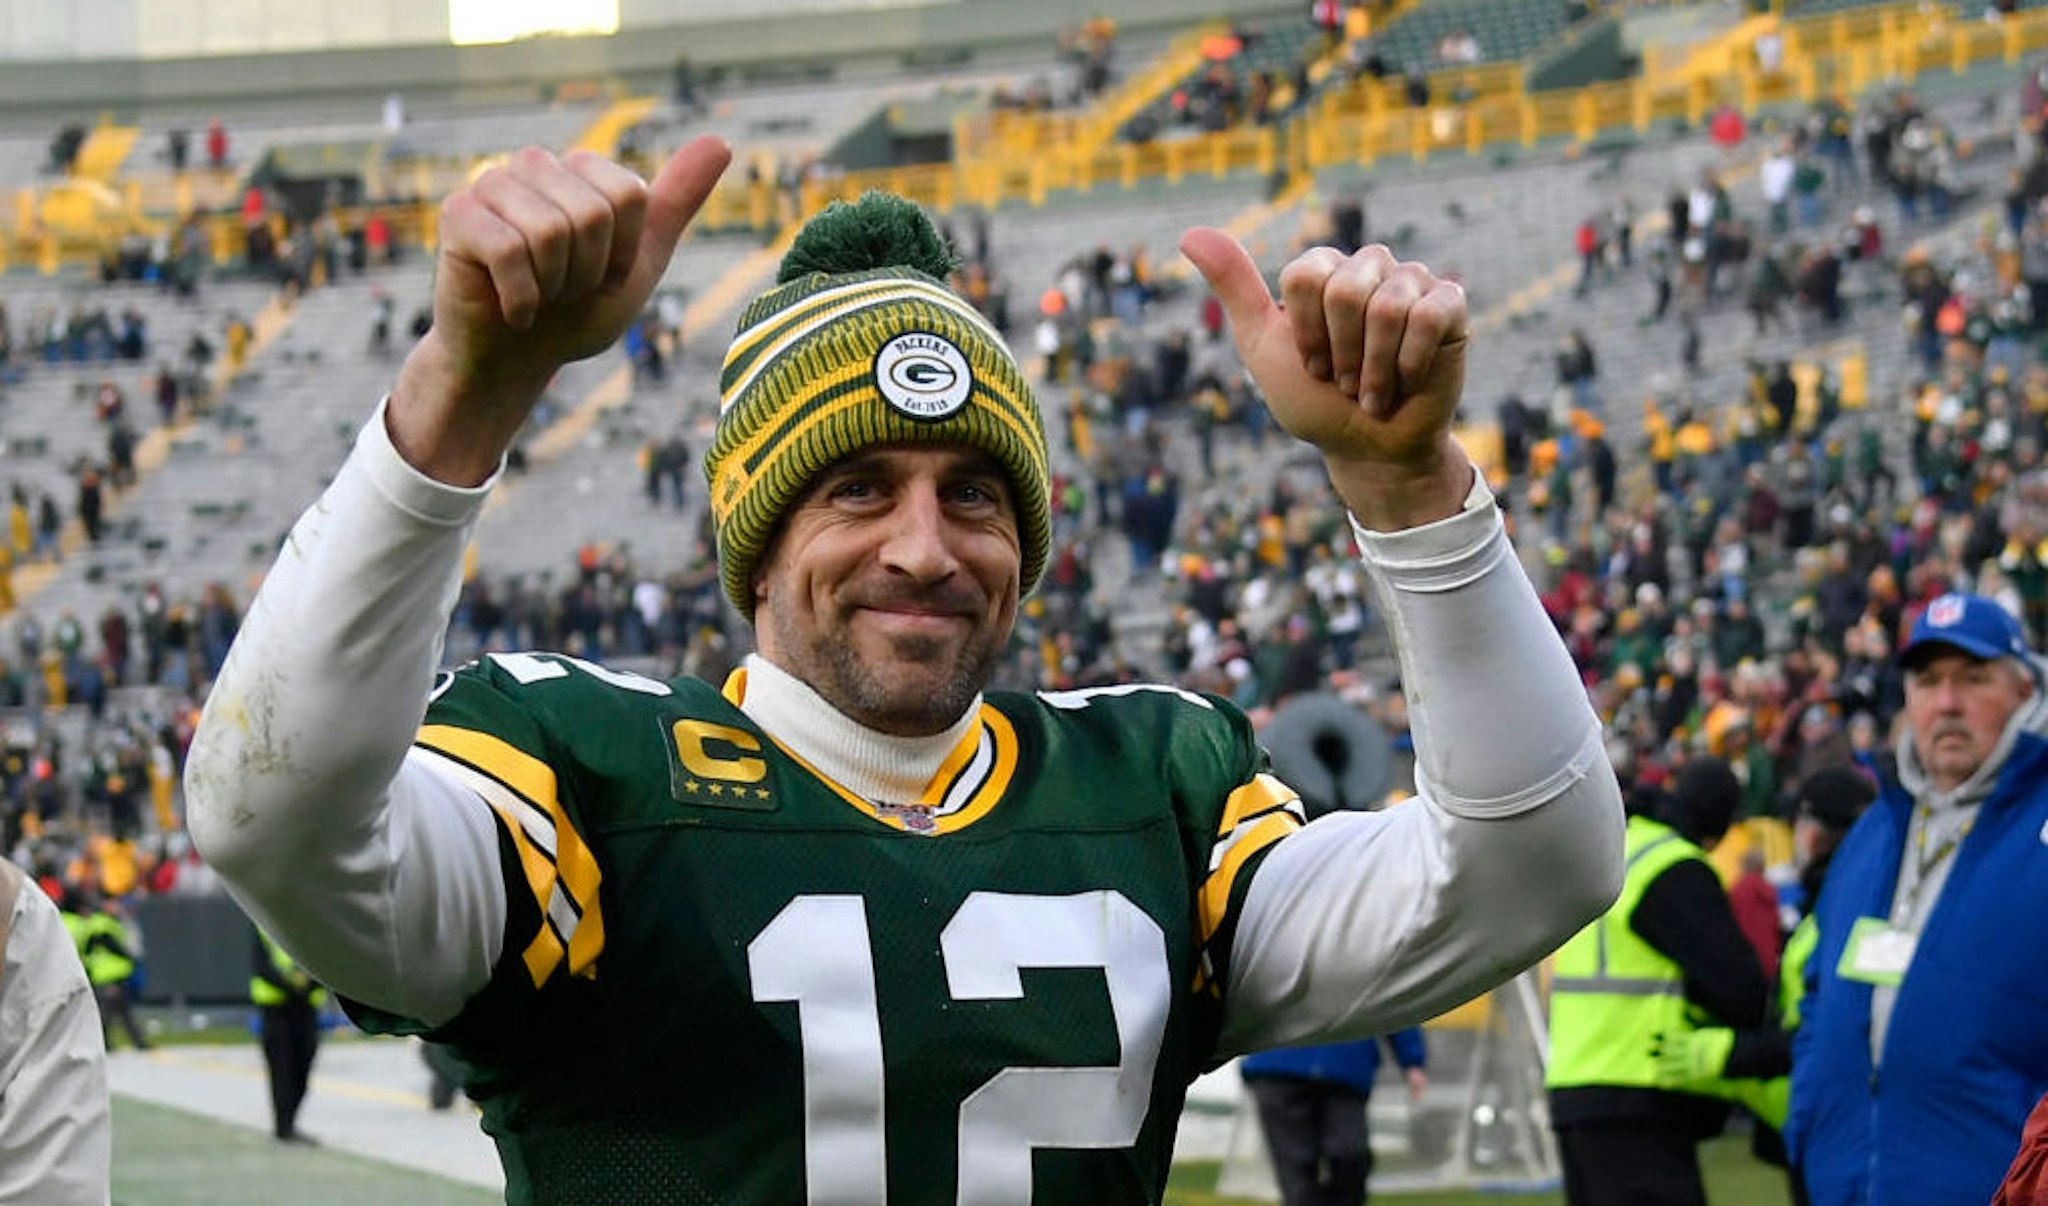 GREEN BAY, WISCONSIN - DECEMBER 08: Aaron Rodgers #12 of the Green Bay Packers reacts after getting the win against the Washington Redskins at Lambeau Field on December 08, 2019 in Green Bay, Wisconsin. (Photo by Quinn Harris/Getty Images)